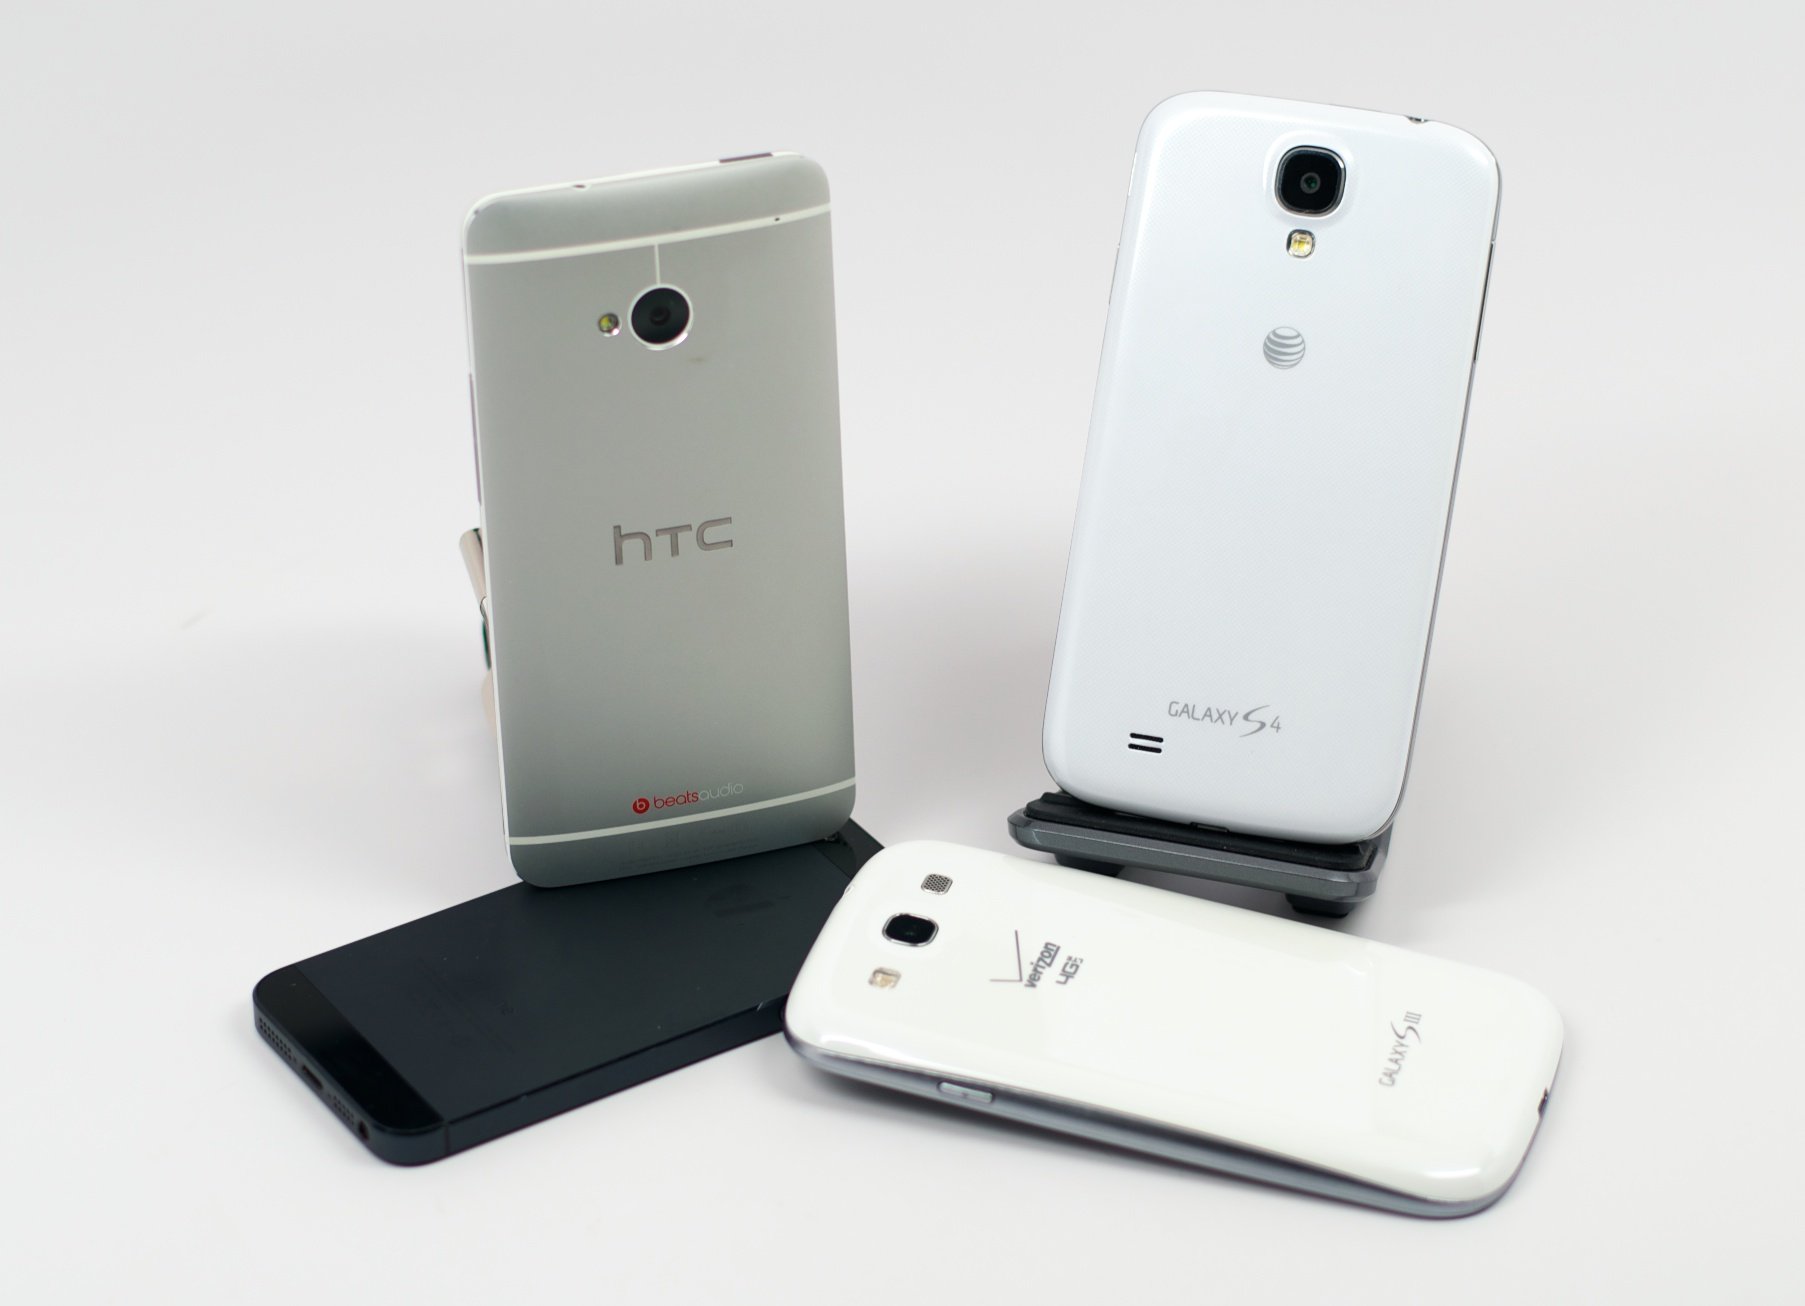 Samsung Galaxy S4 and HTC One and iPHone